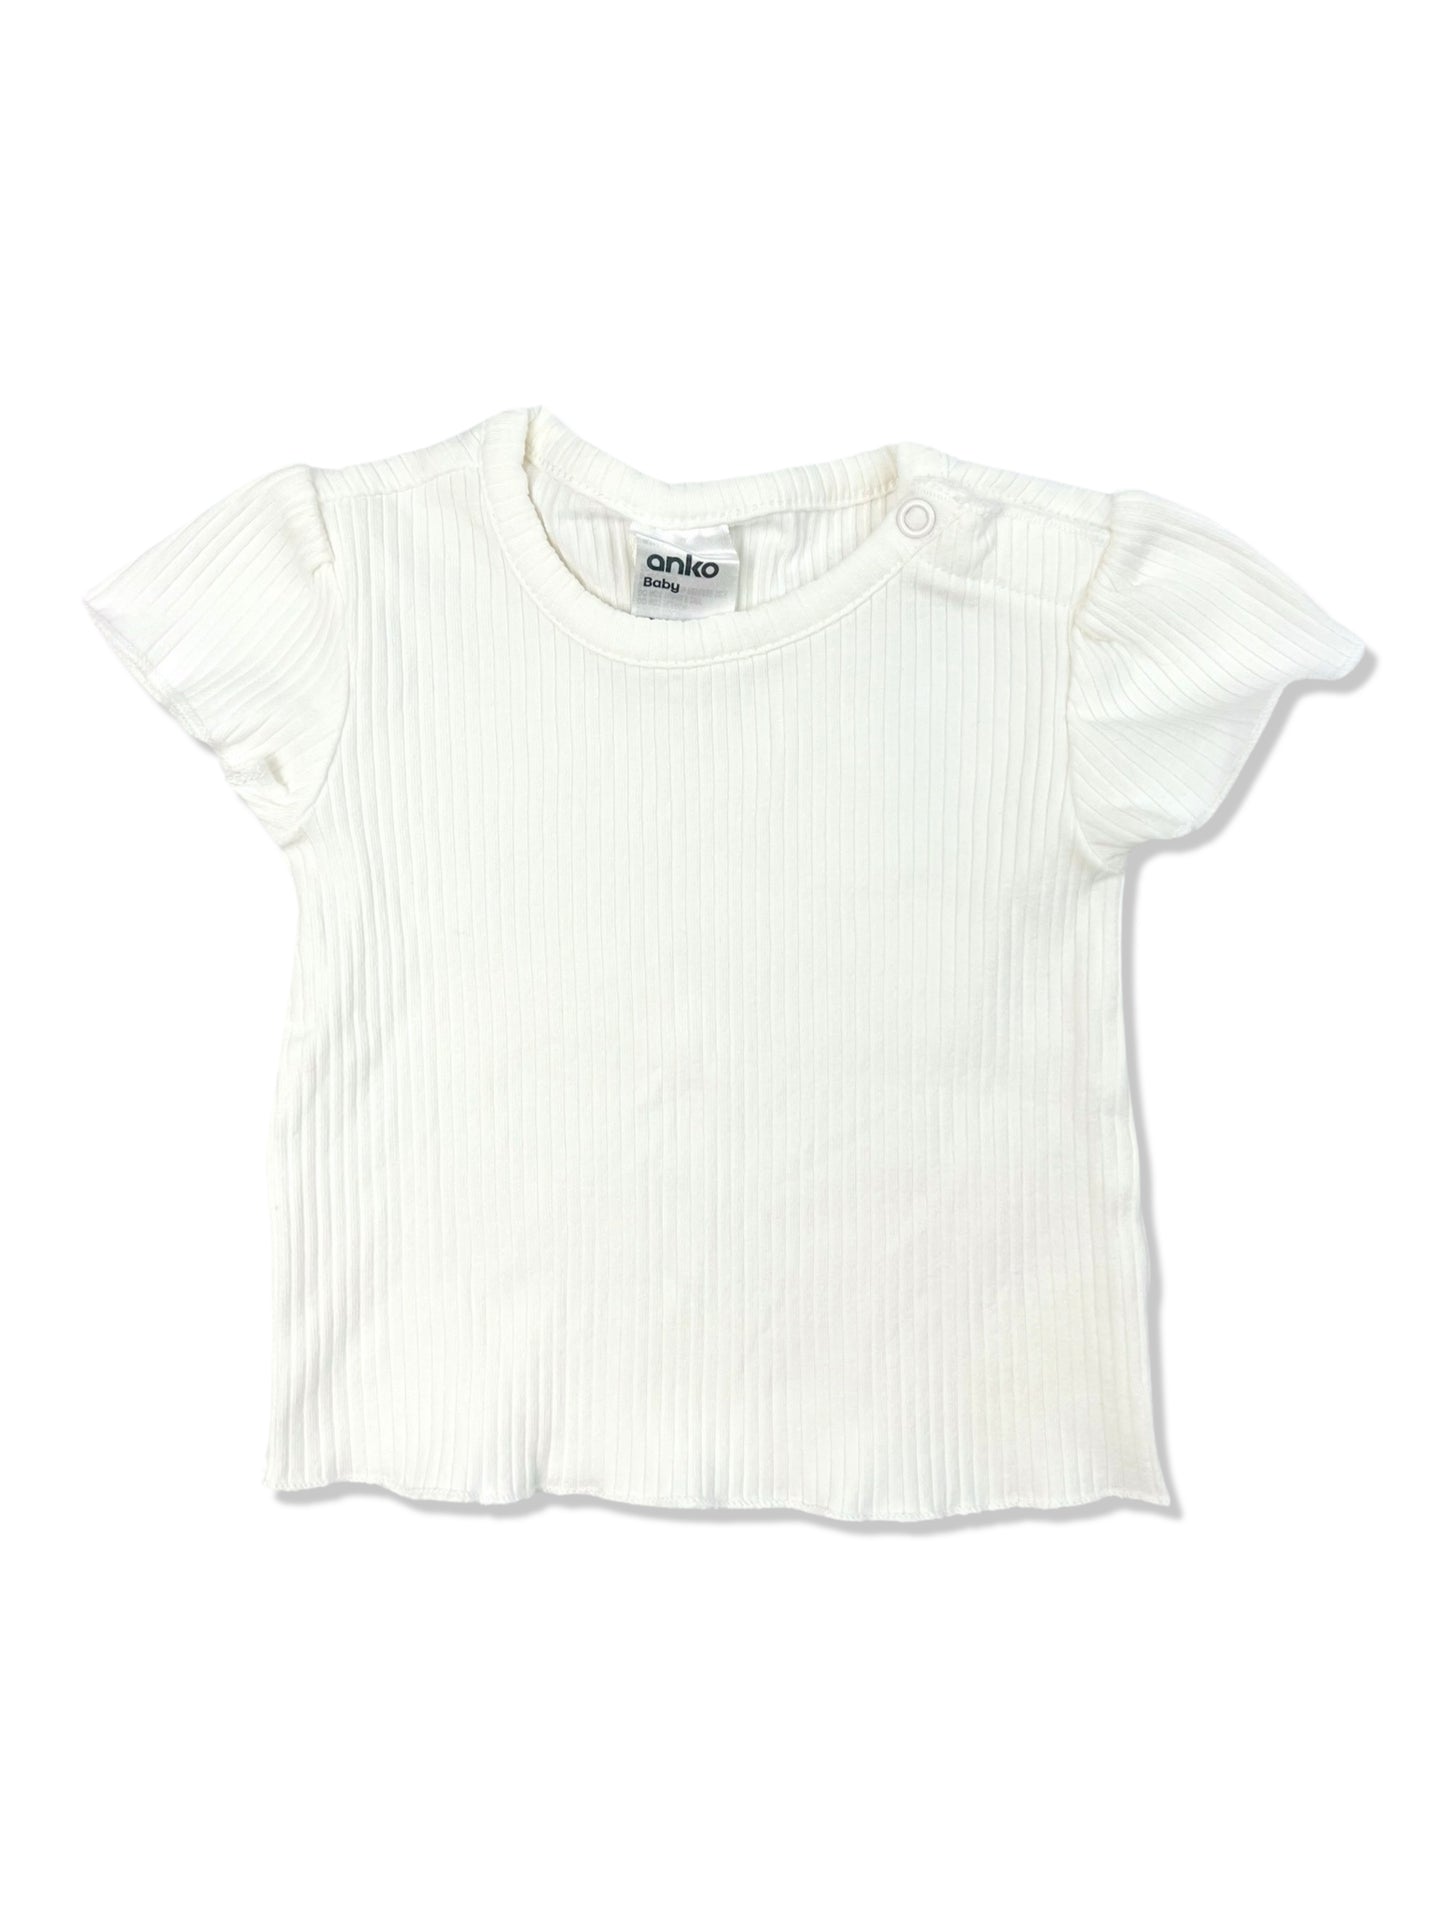 Anko Ribbed SS Top - Size 0000